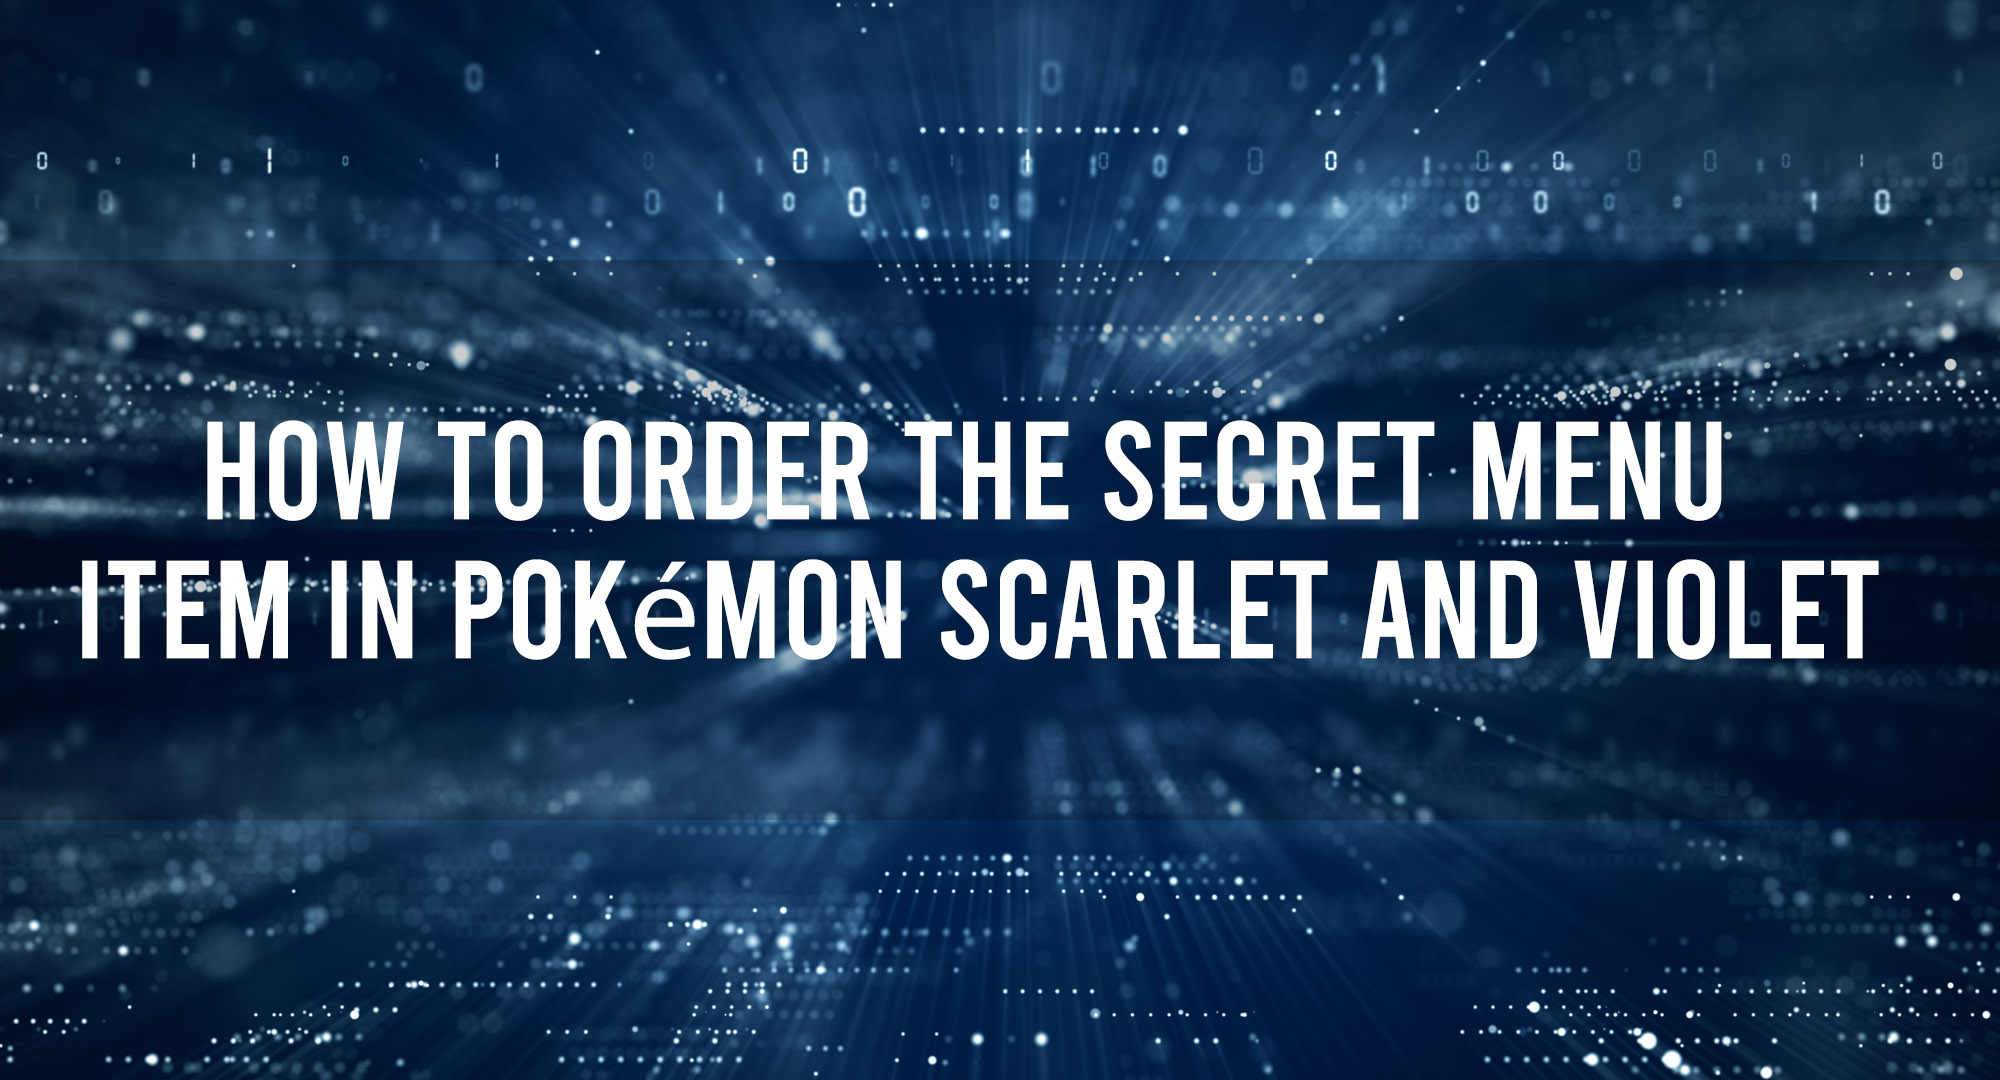 How to order the secrete menu item in pokemon scarlet and violet